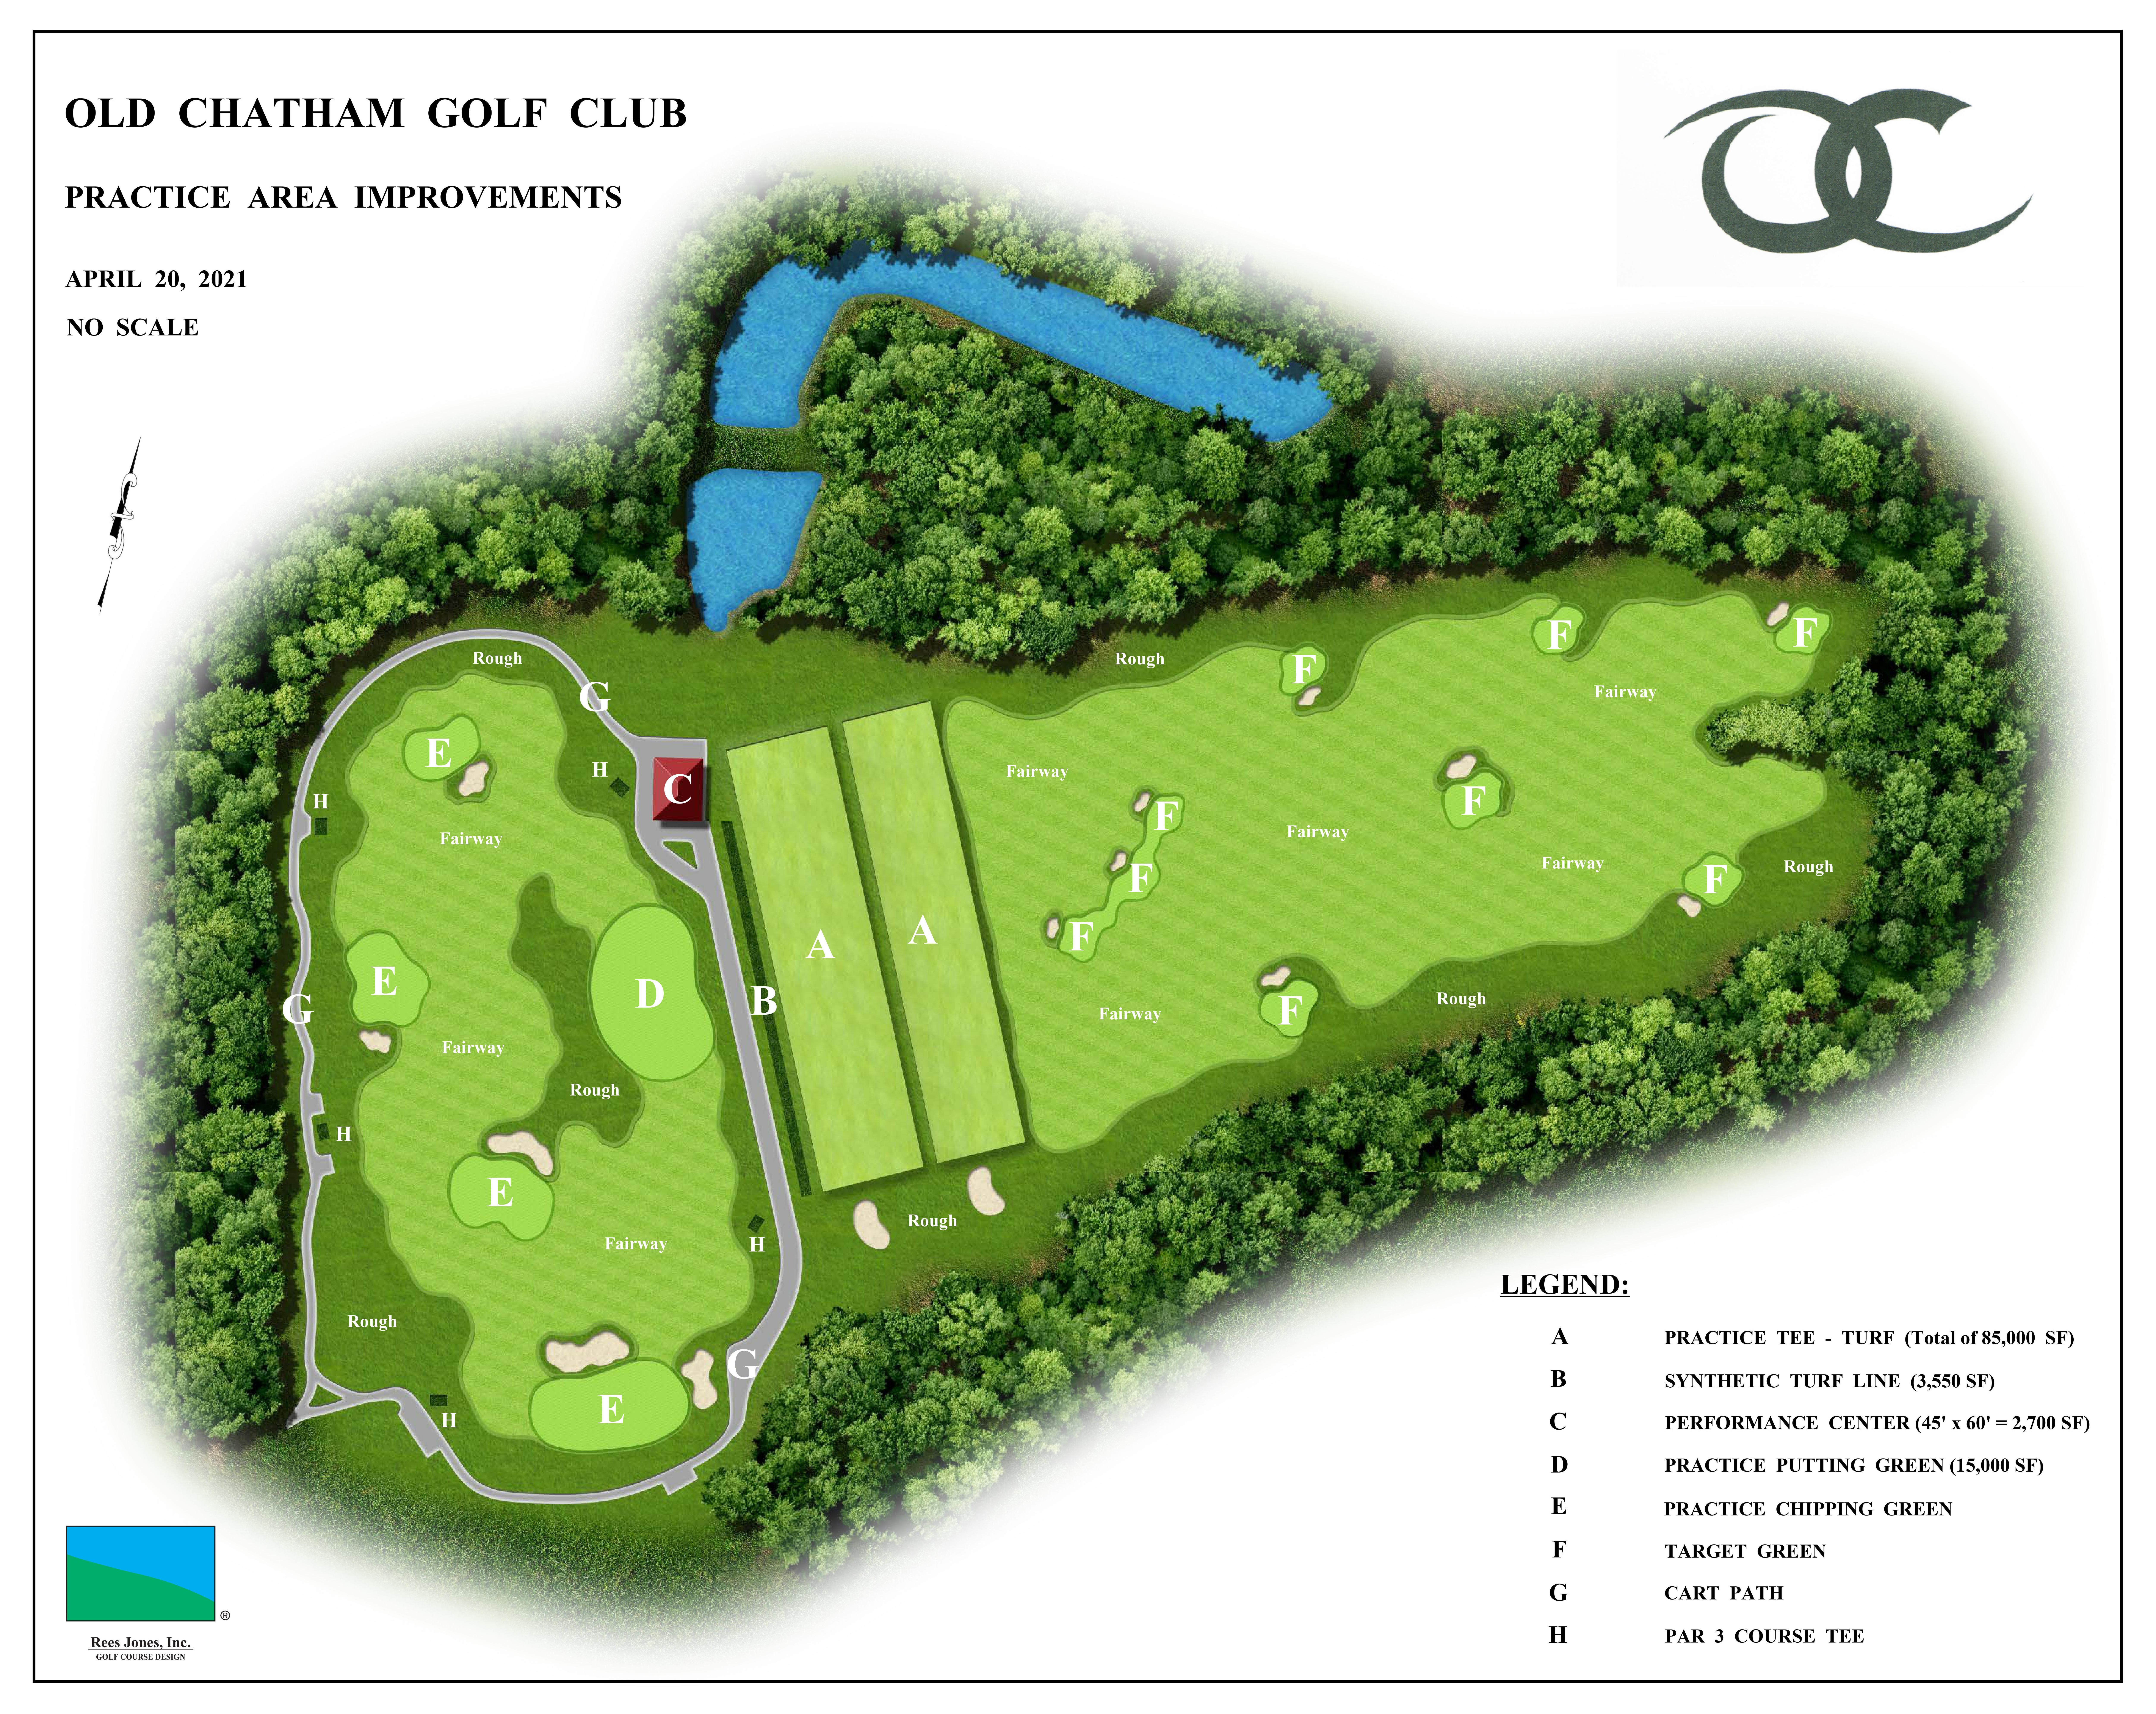 Old Chatham Golf Club - Practice Area